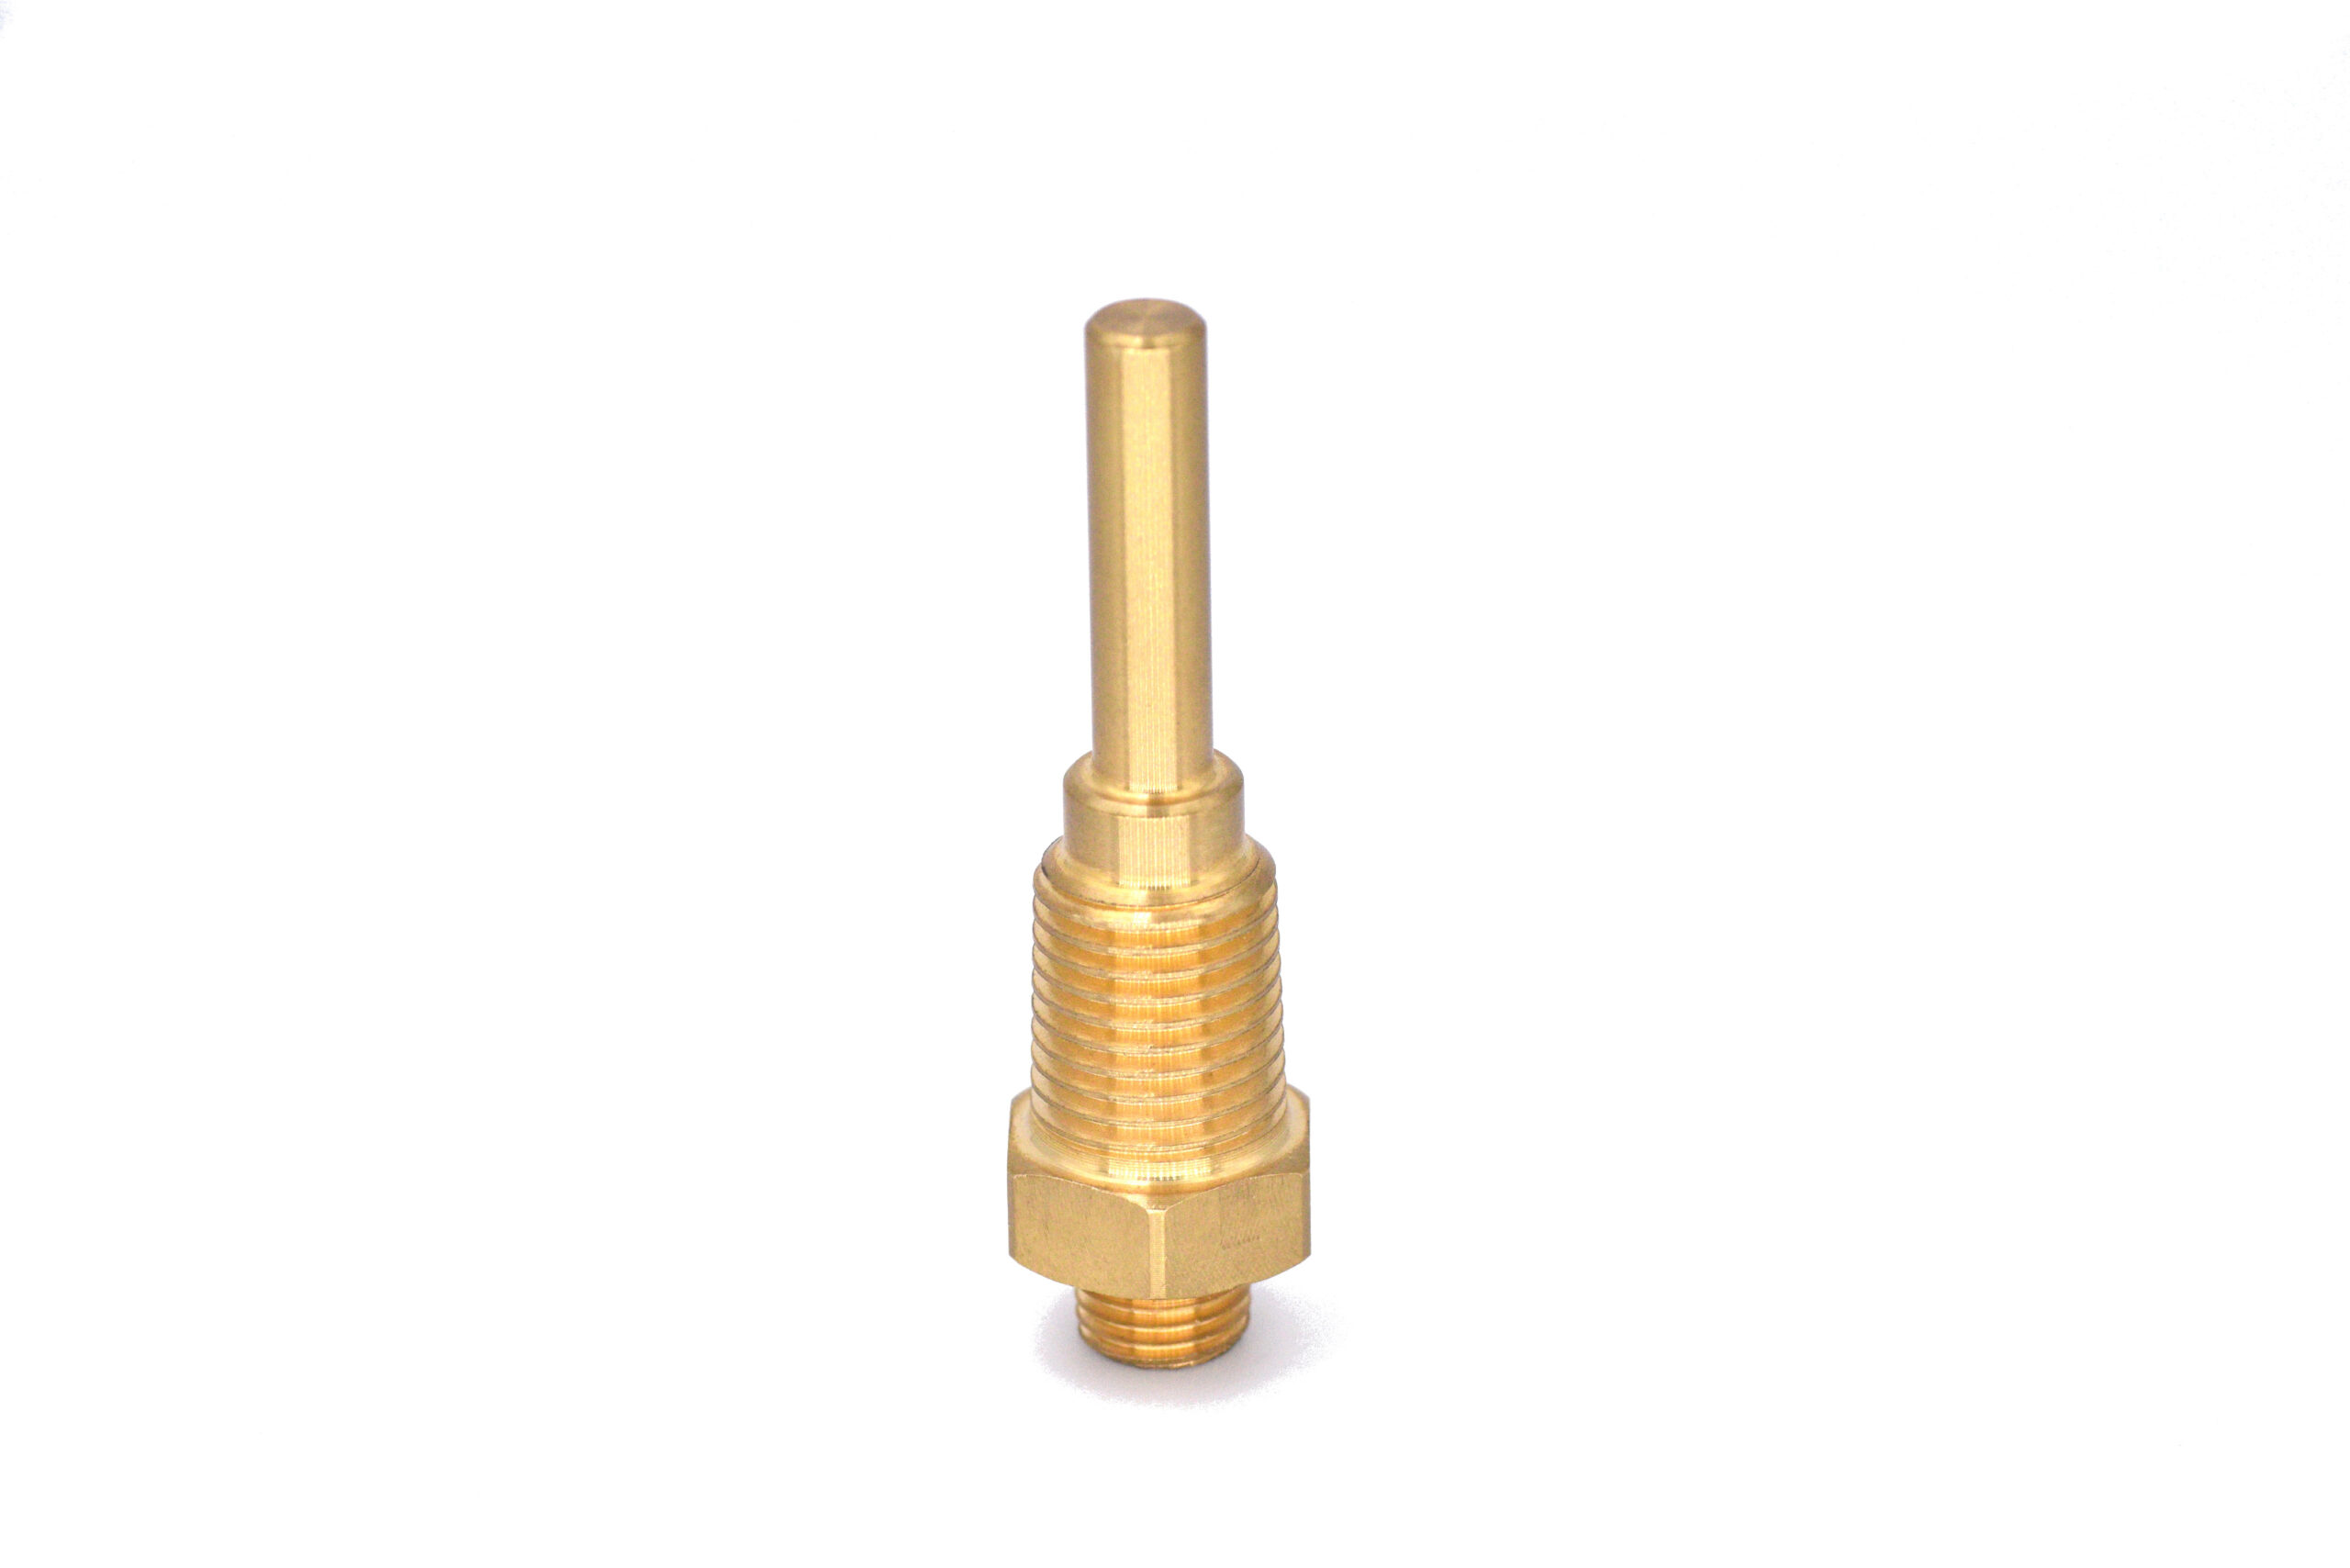 machining of connector sector parts, small diameter parts and long parts